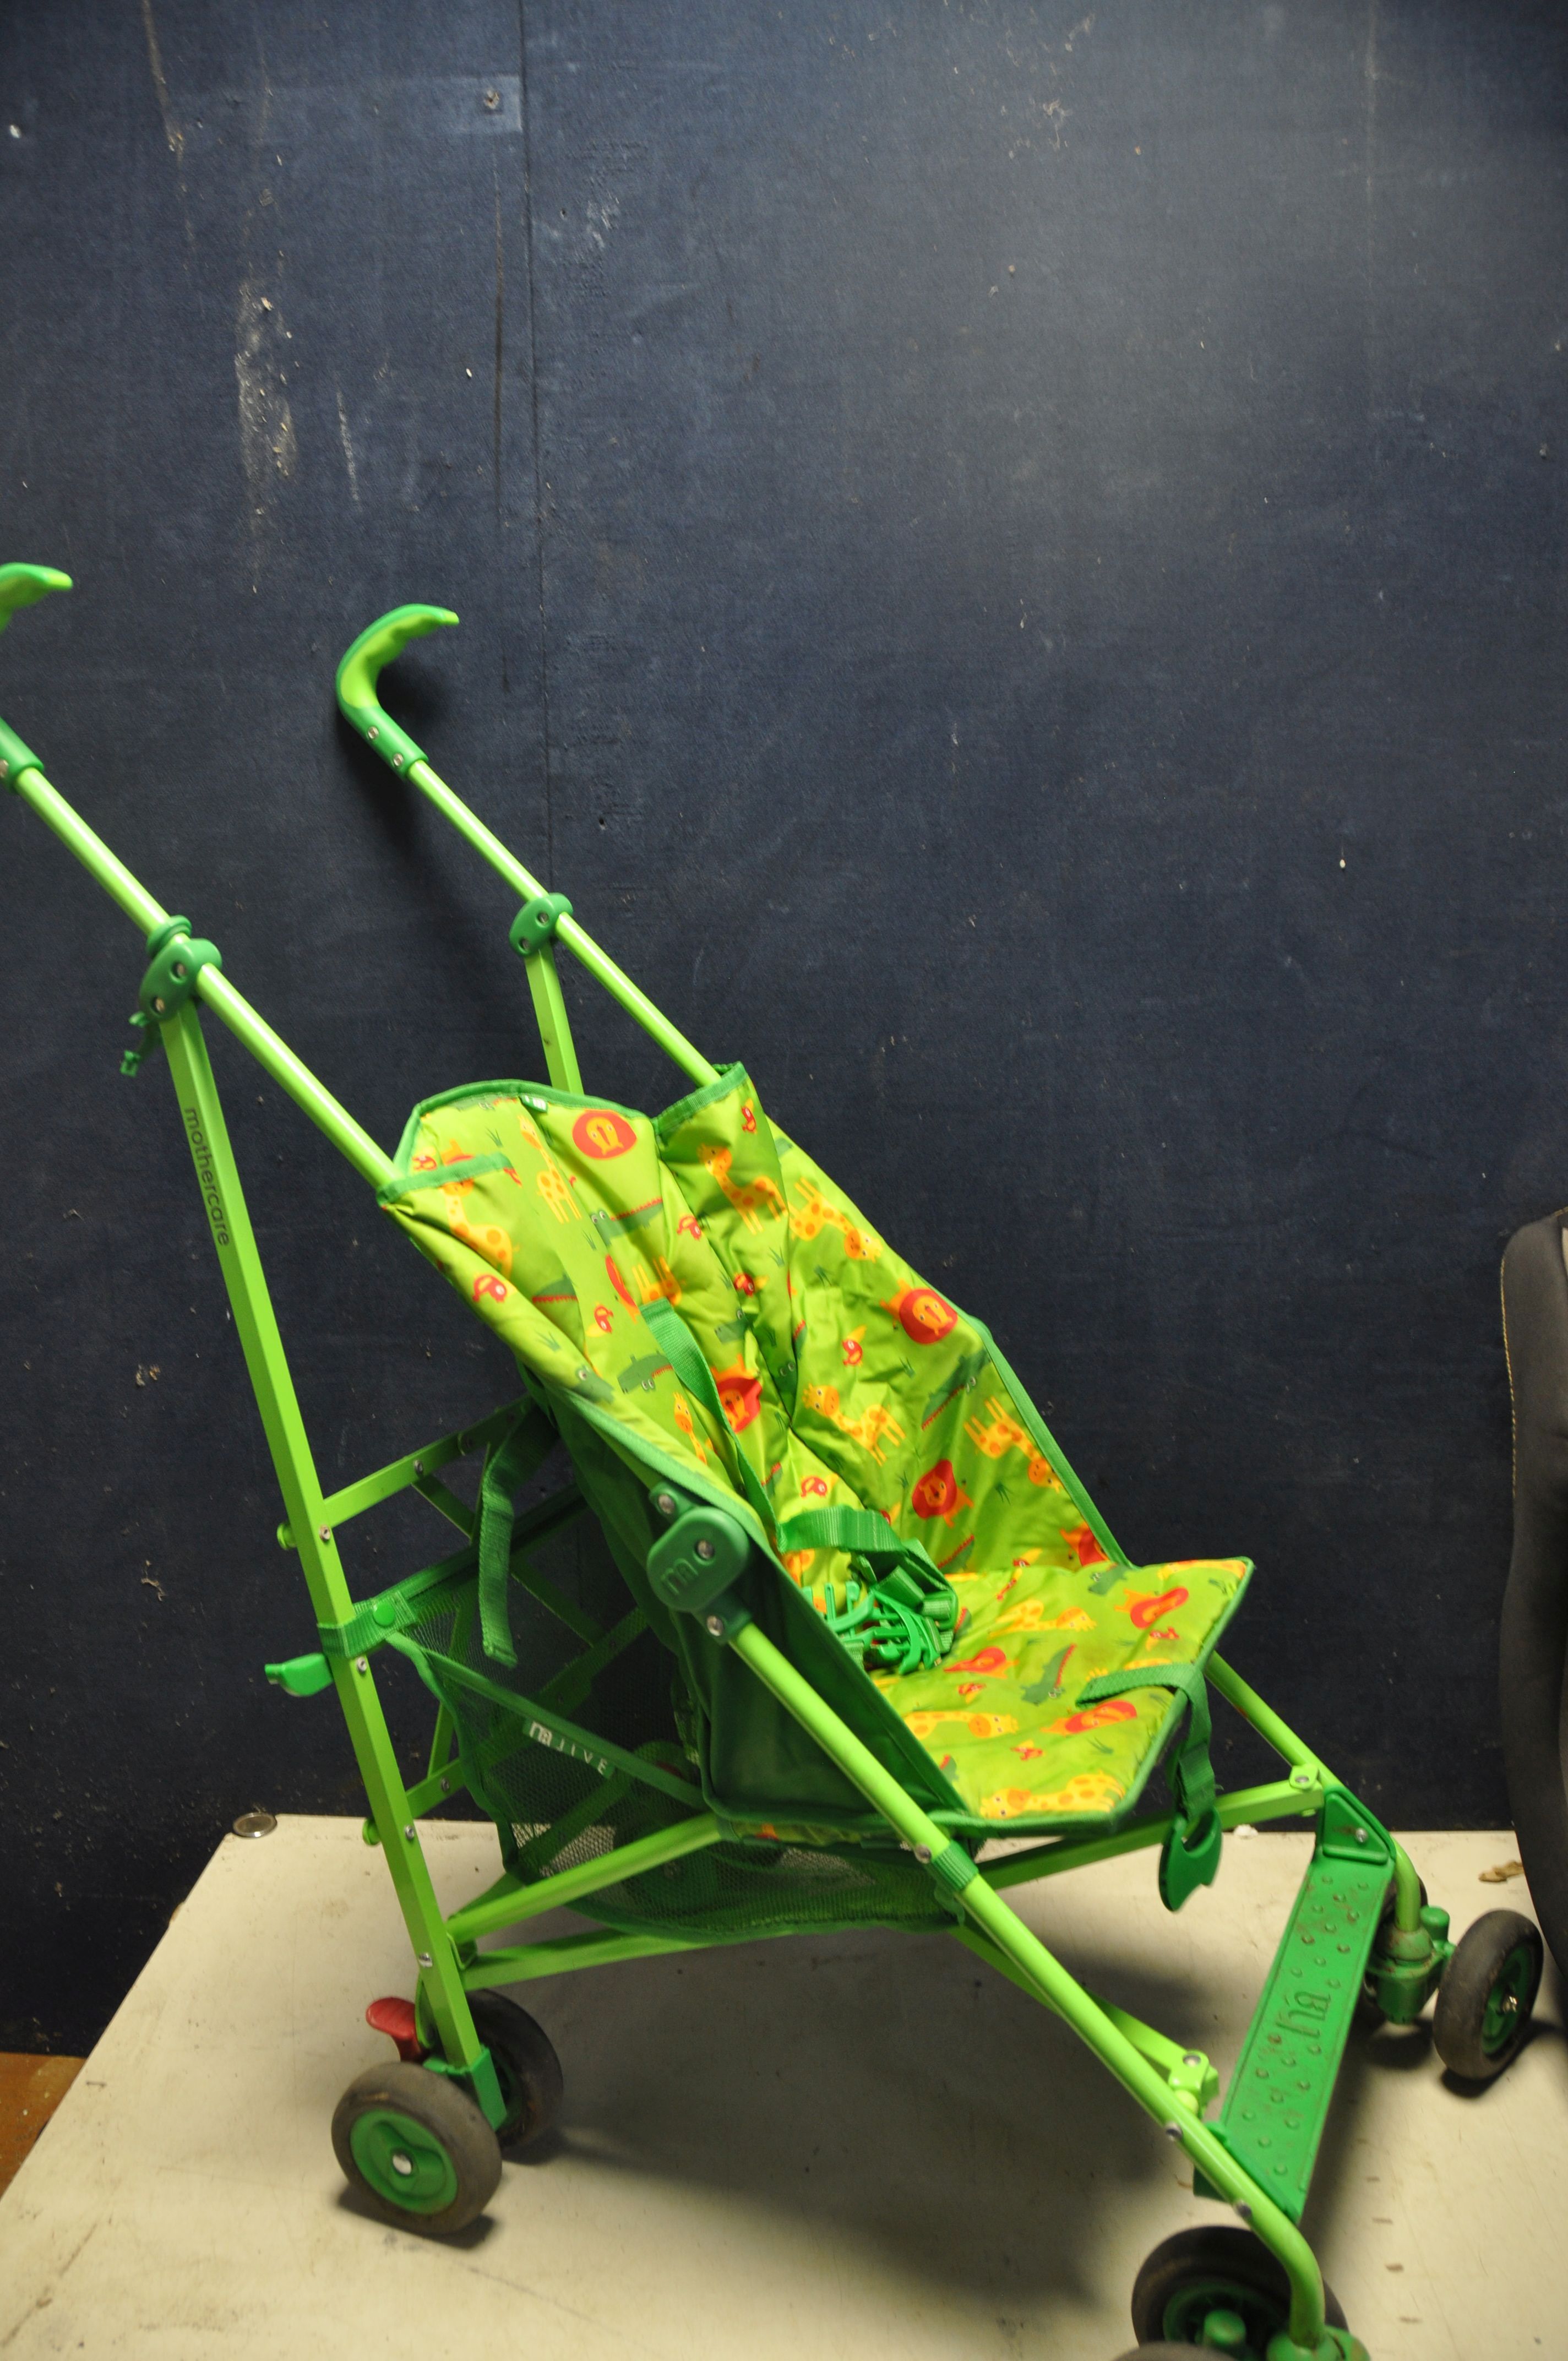 A KOOCHI PUSHMATIC PUSHCHAIR. three wheeled pushchair along with a Mothercare safari stroller, a - Image 2 of 3